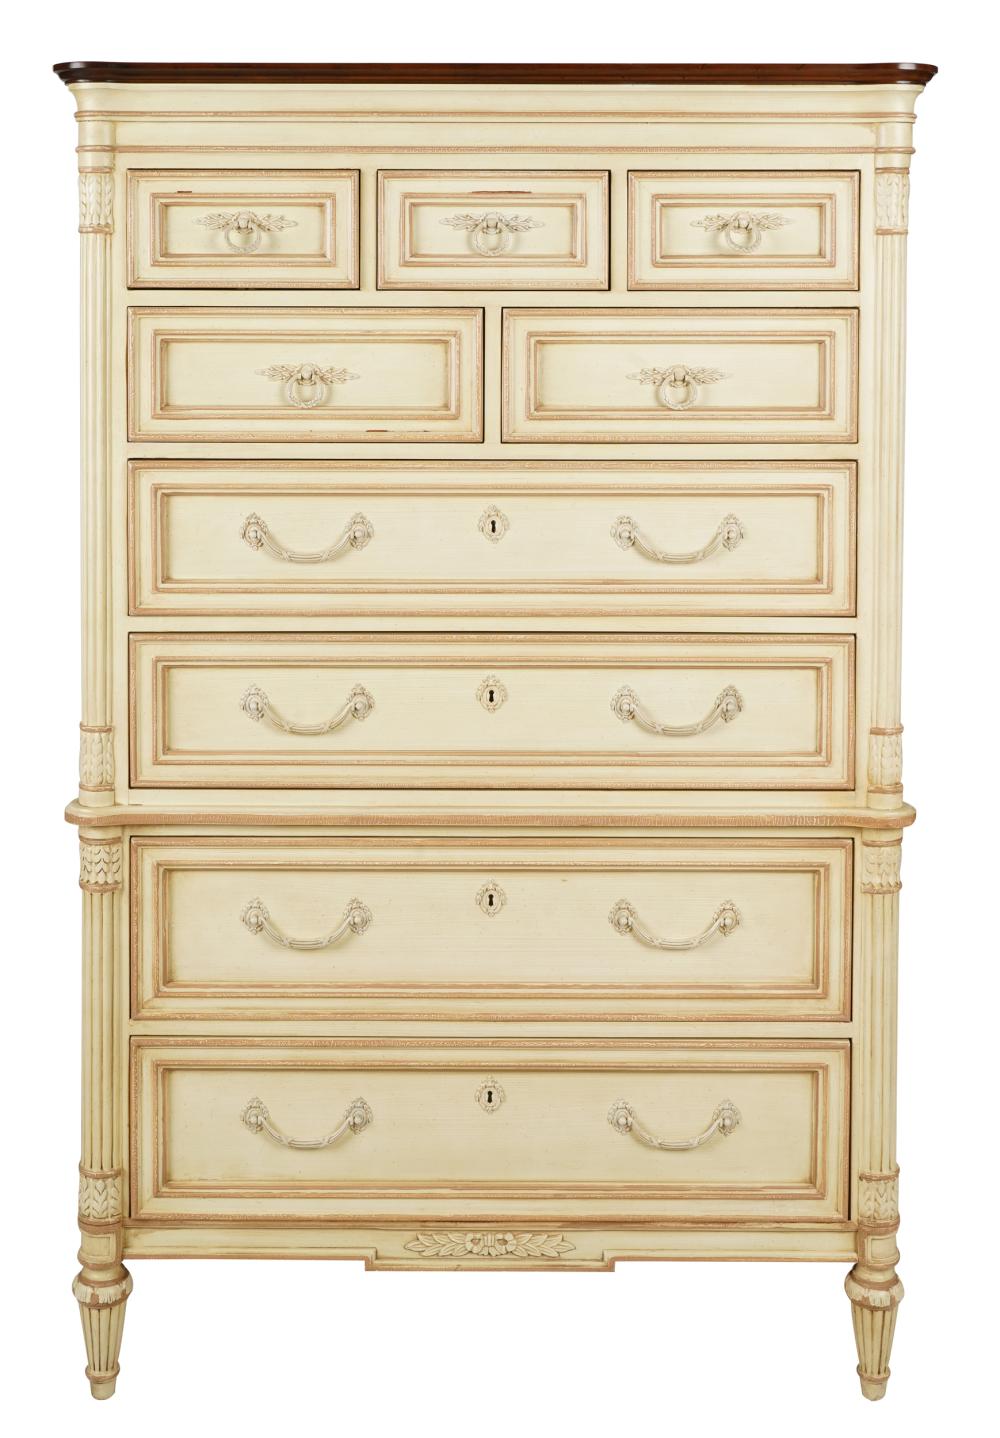 PAIR OF NEOCLASSIC STYLE PAINTED 330b62